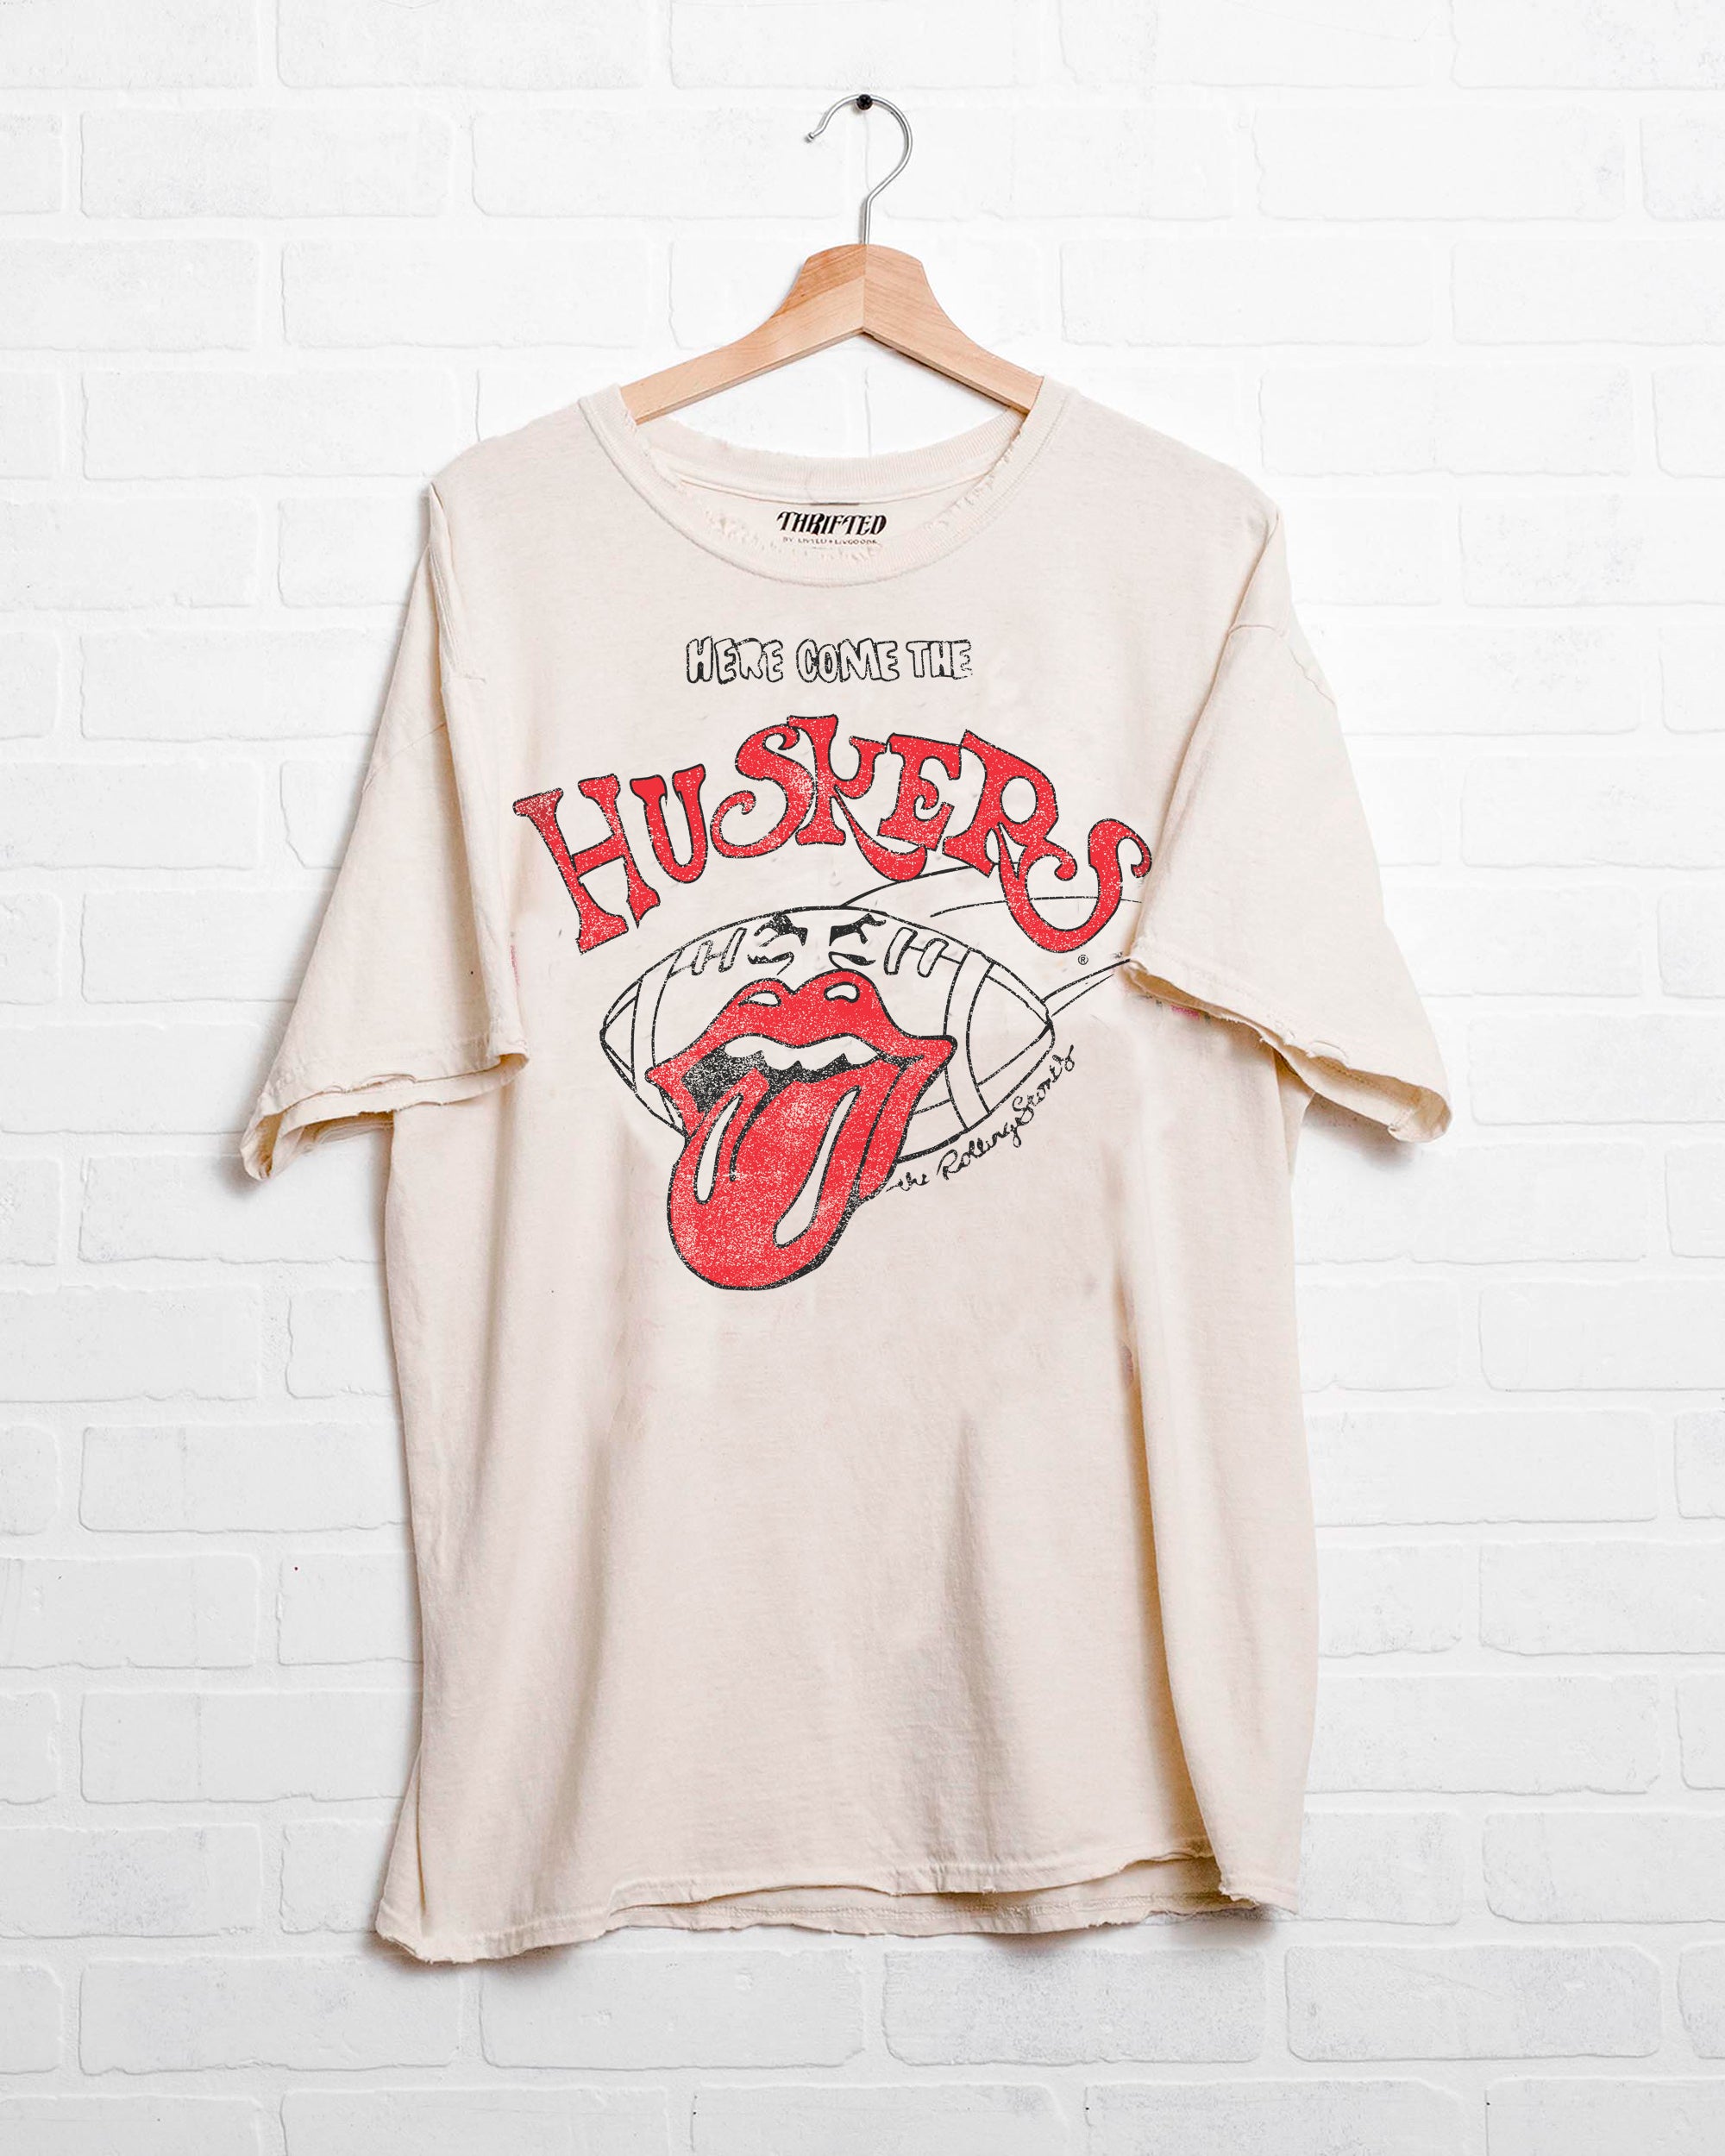 Rolling Stones Here Come the Huskers White Tee - shoplivylu